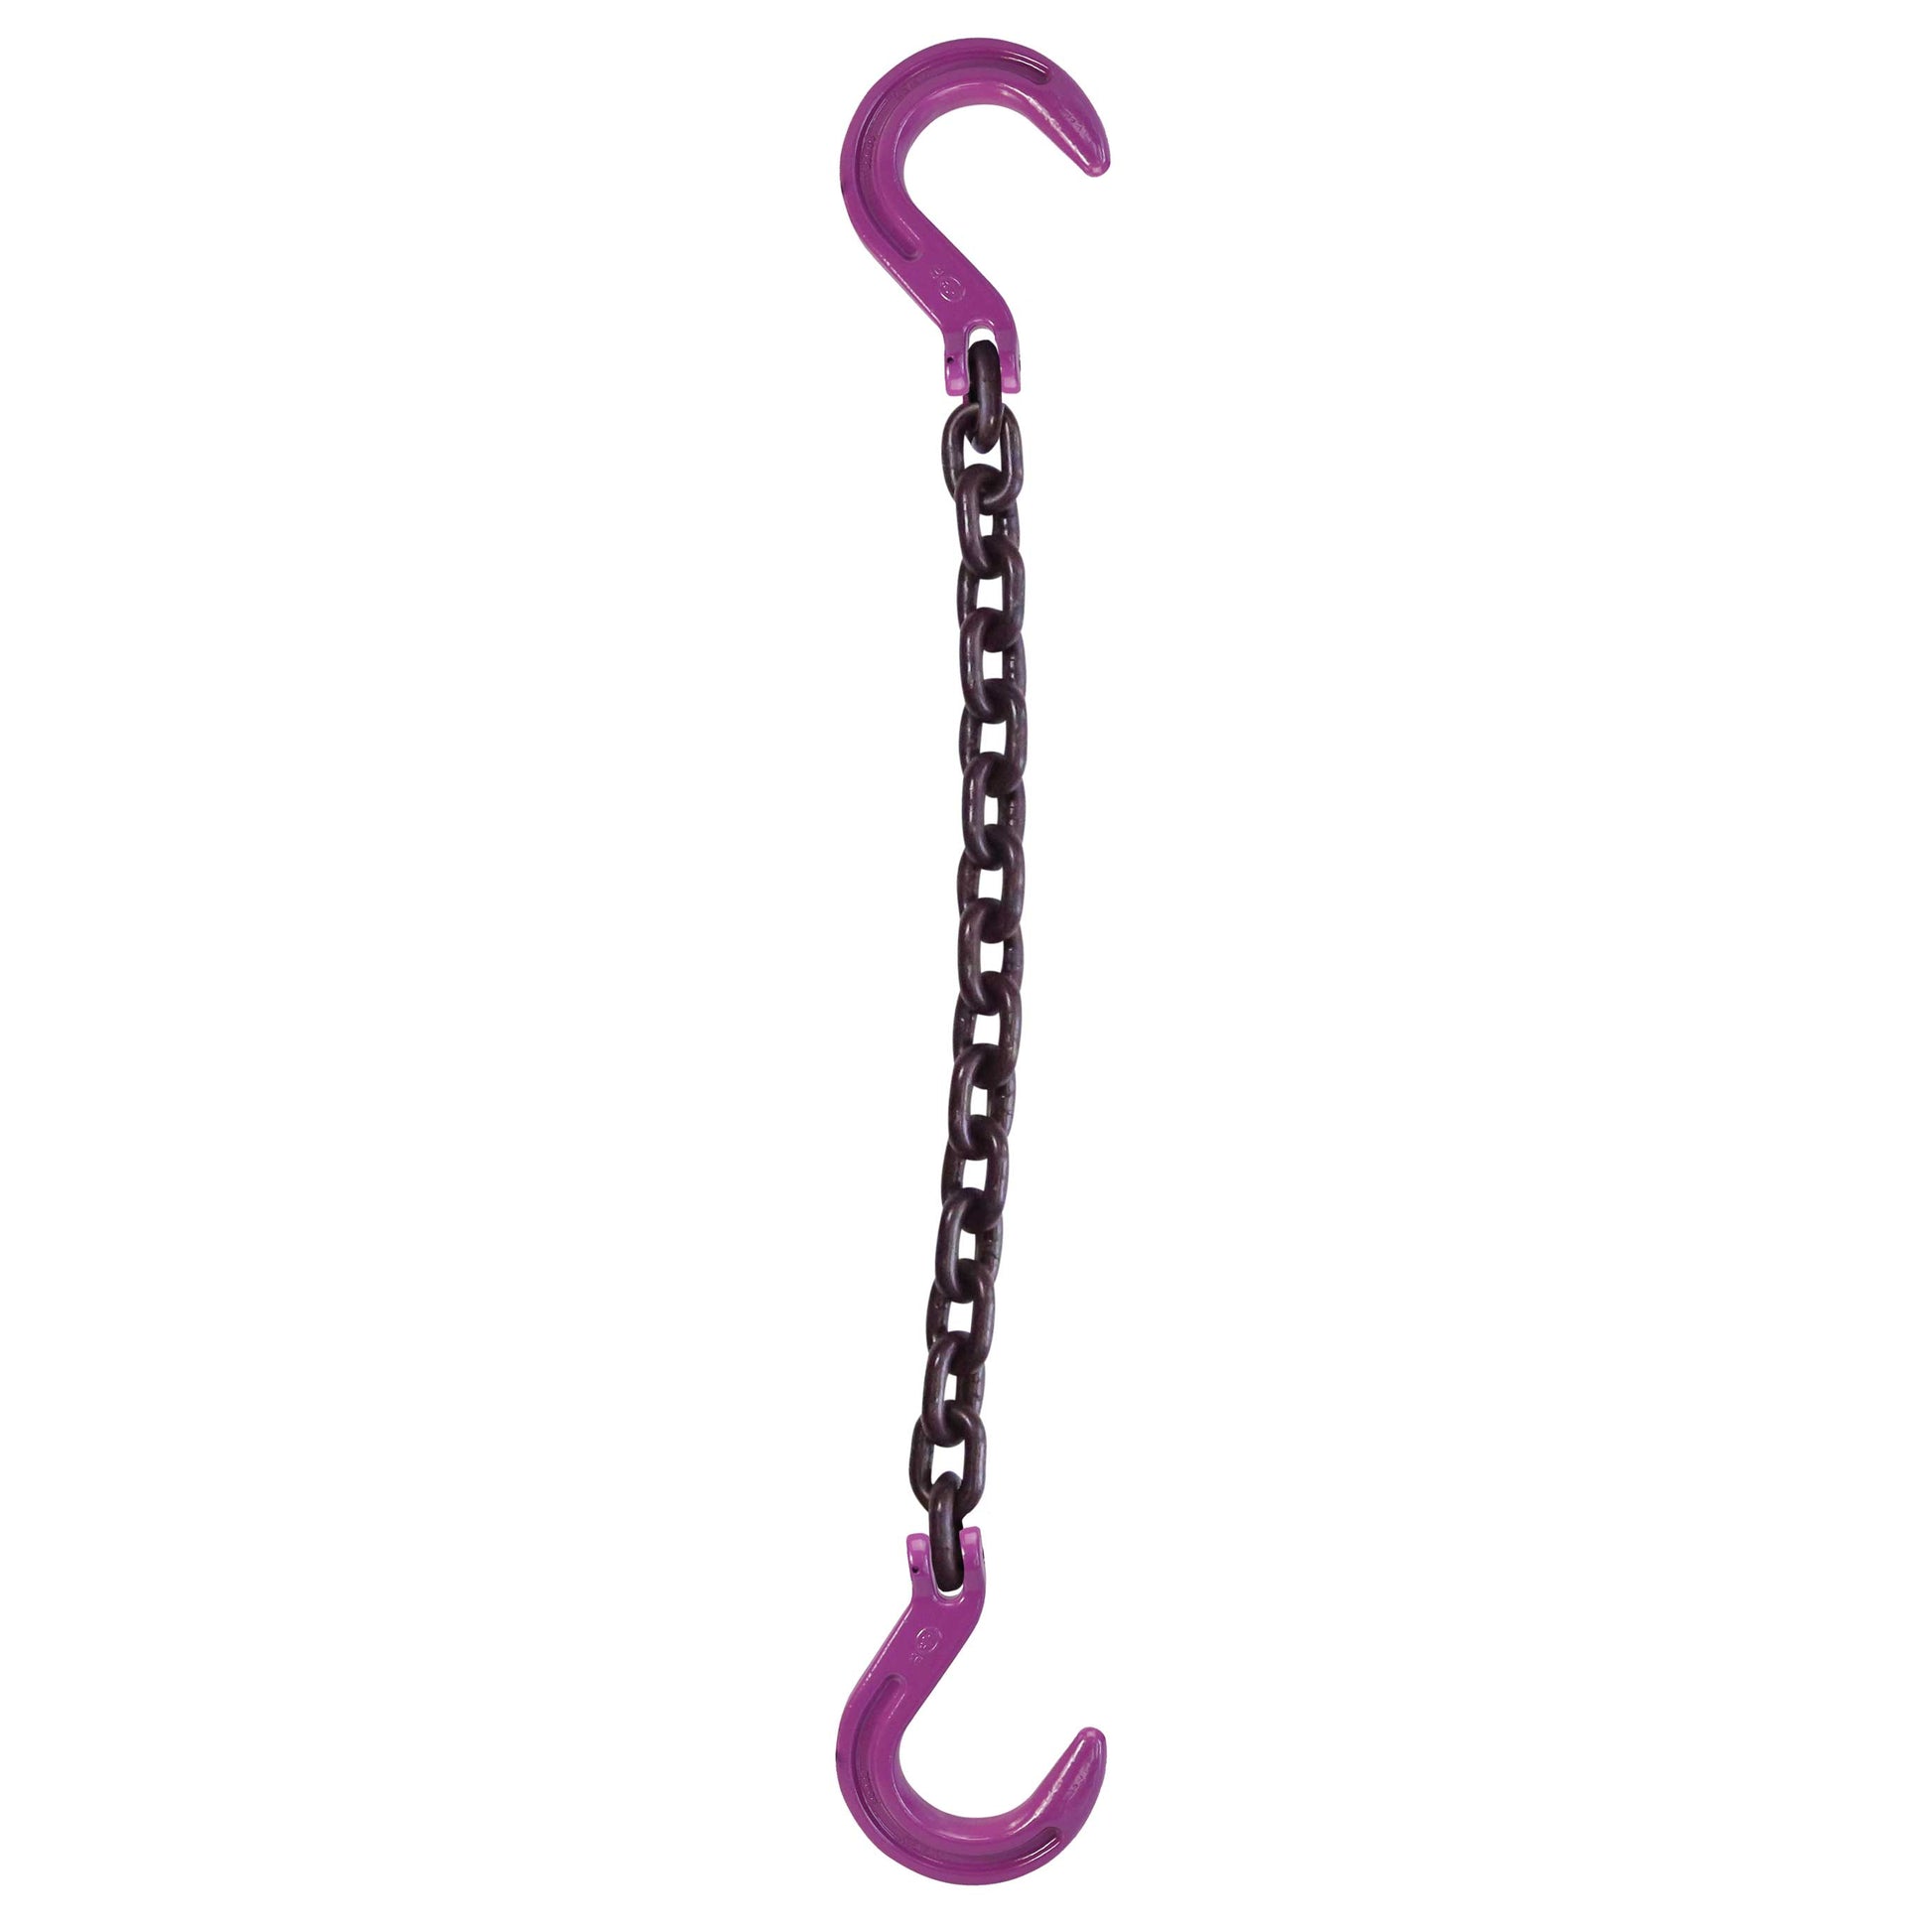 516 inch x 18 foot Single Leg Chain Sling w Foundry & Foundry Hooks Grade 100 image 1 of 2